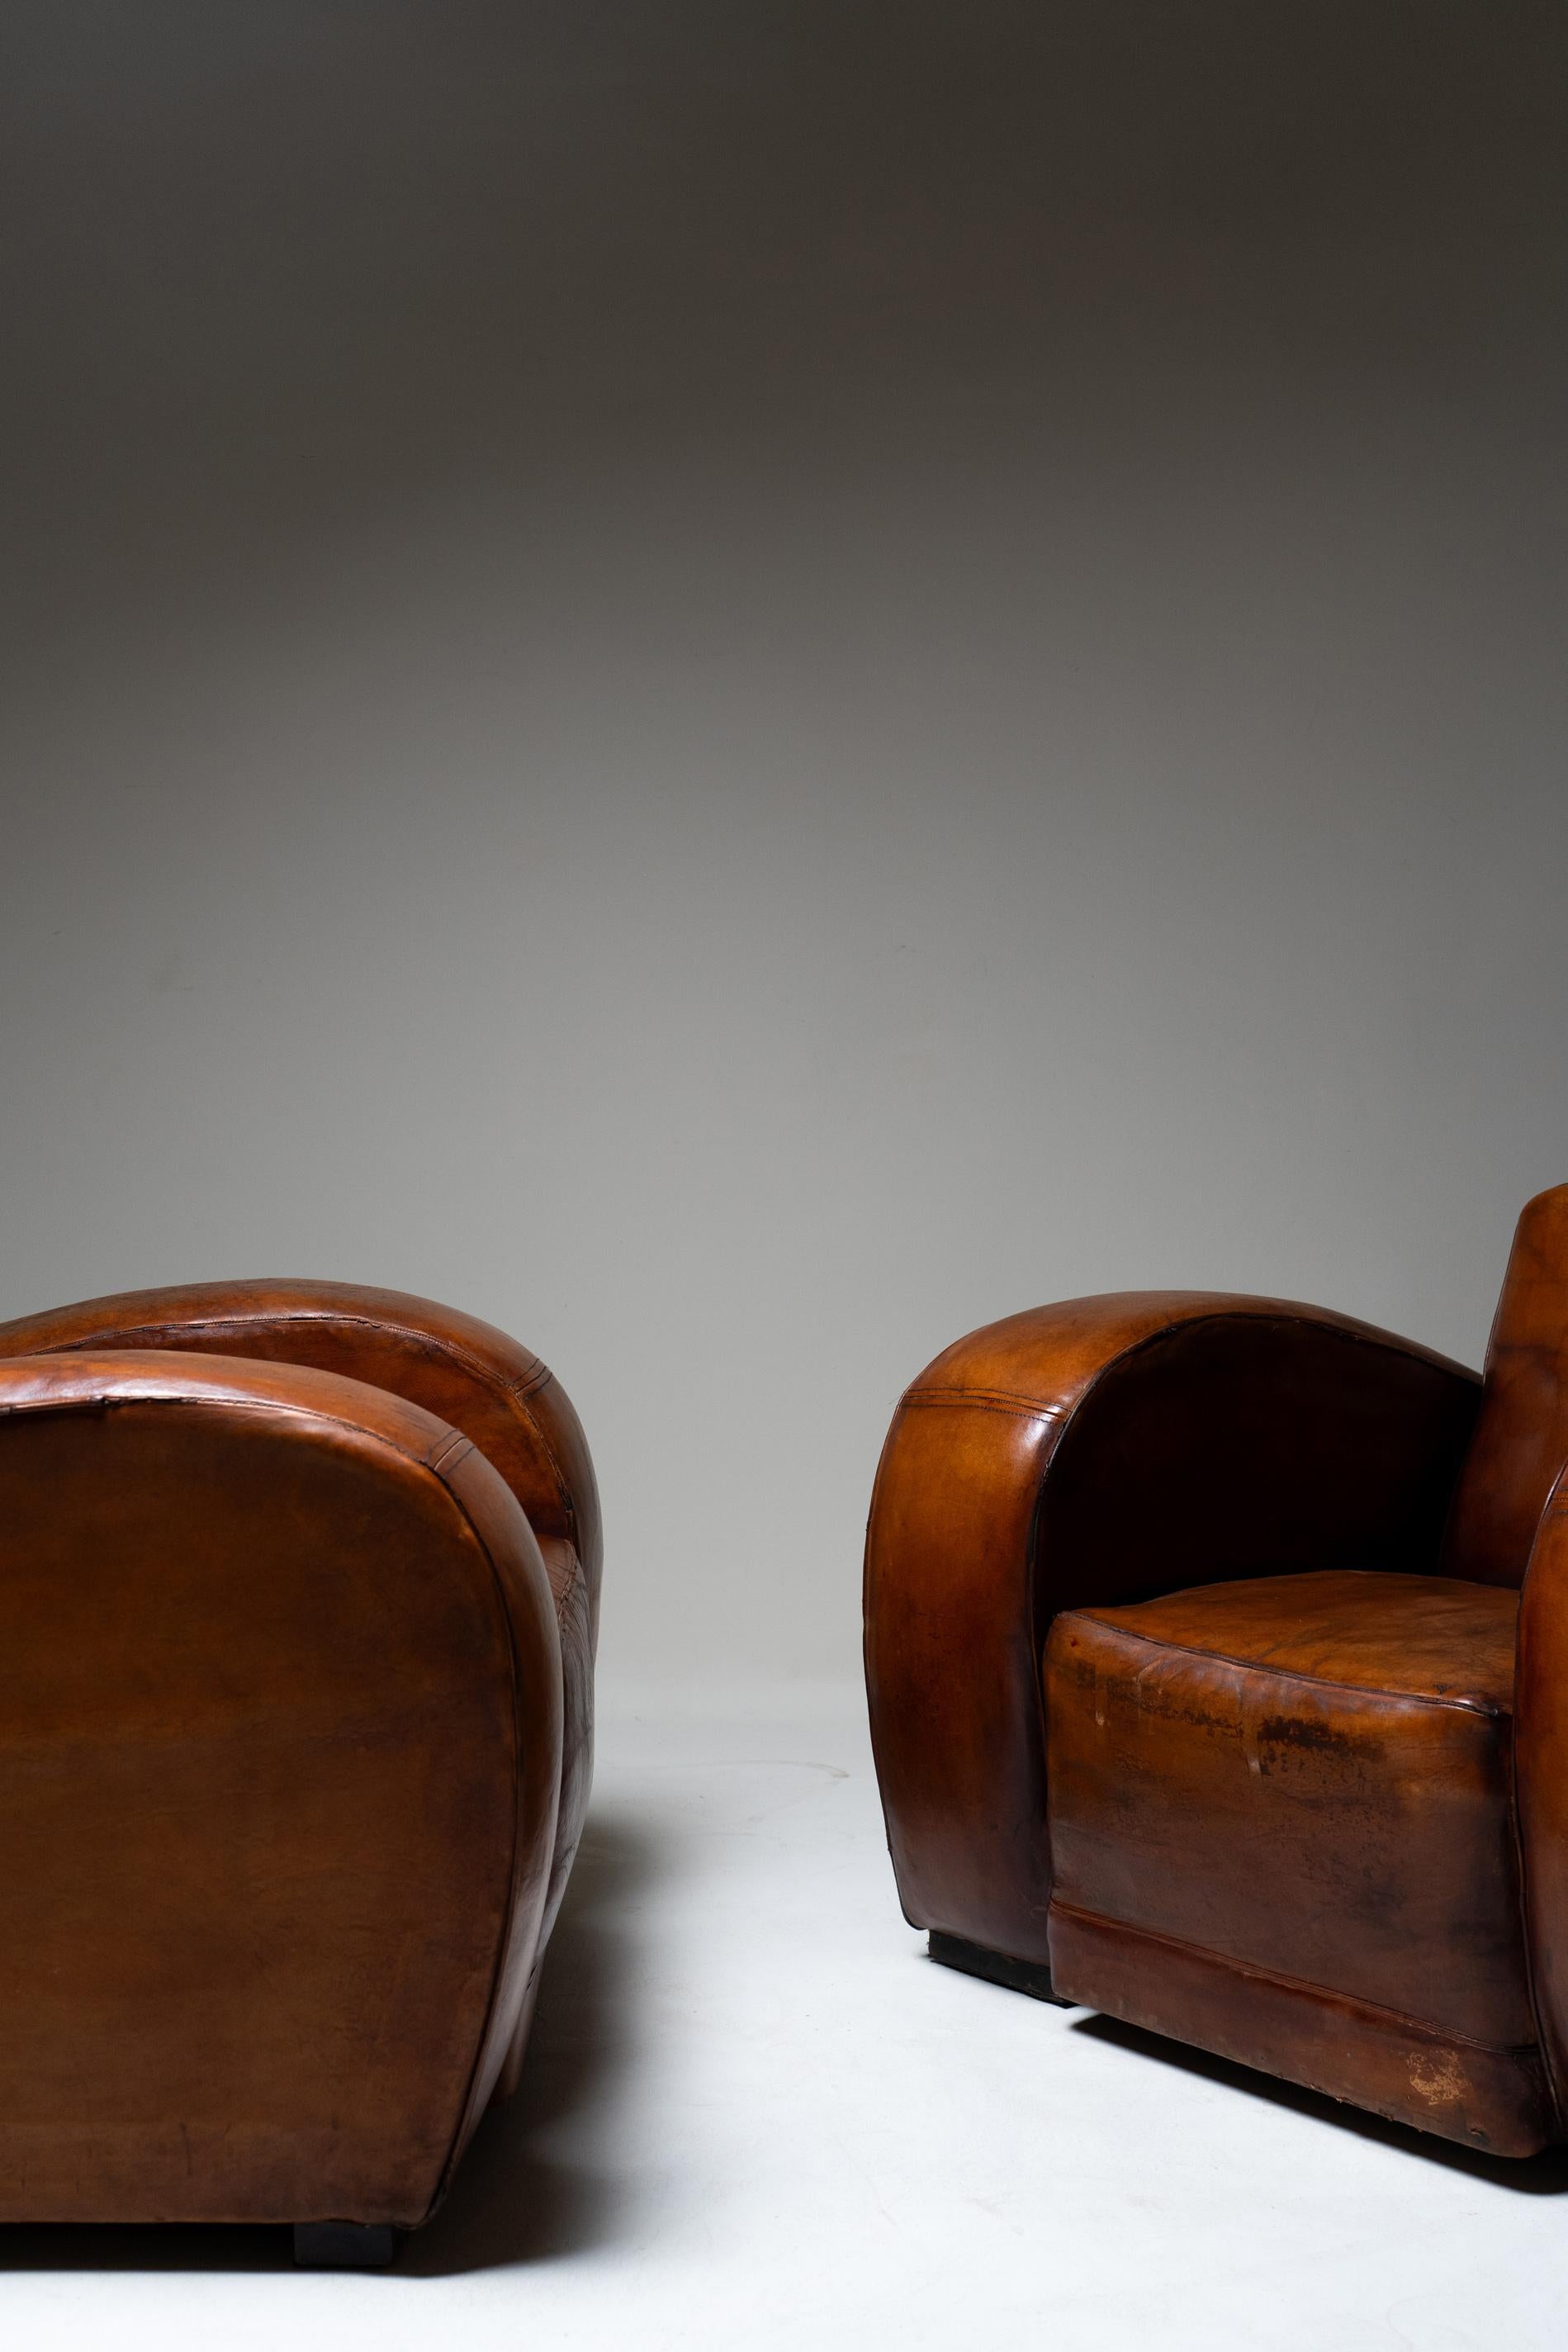 A Pair of Art Deco Leather Club Chairs, France c.1930 For Sale 8